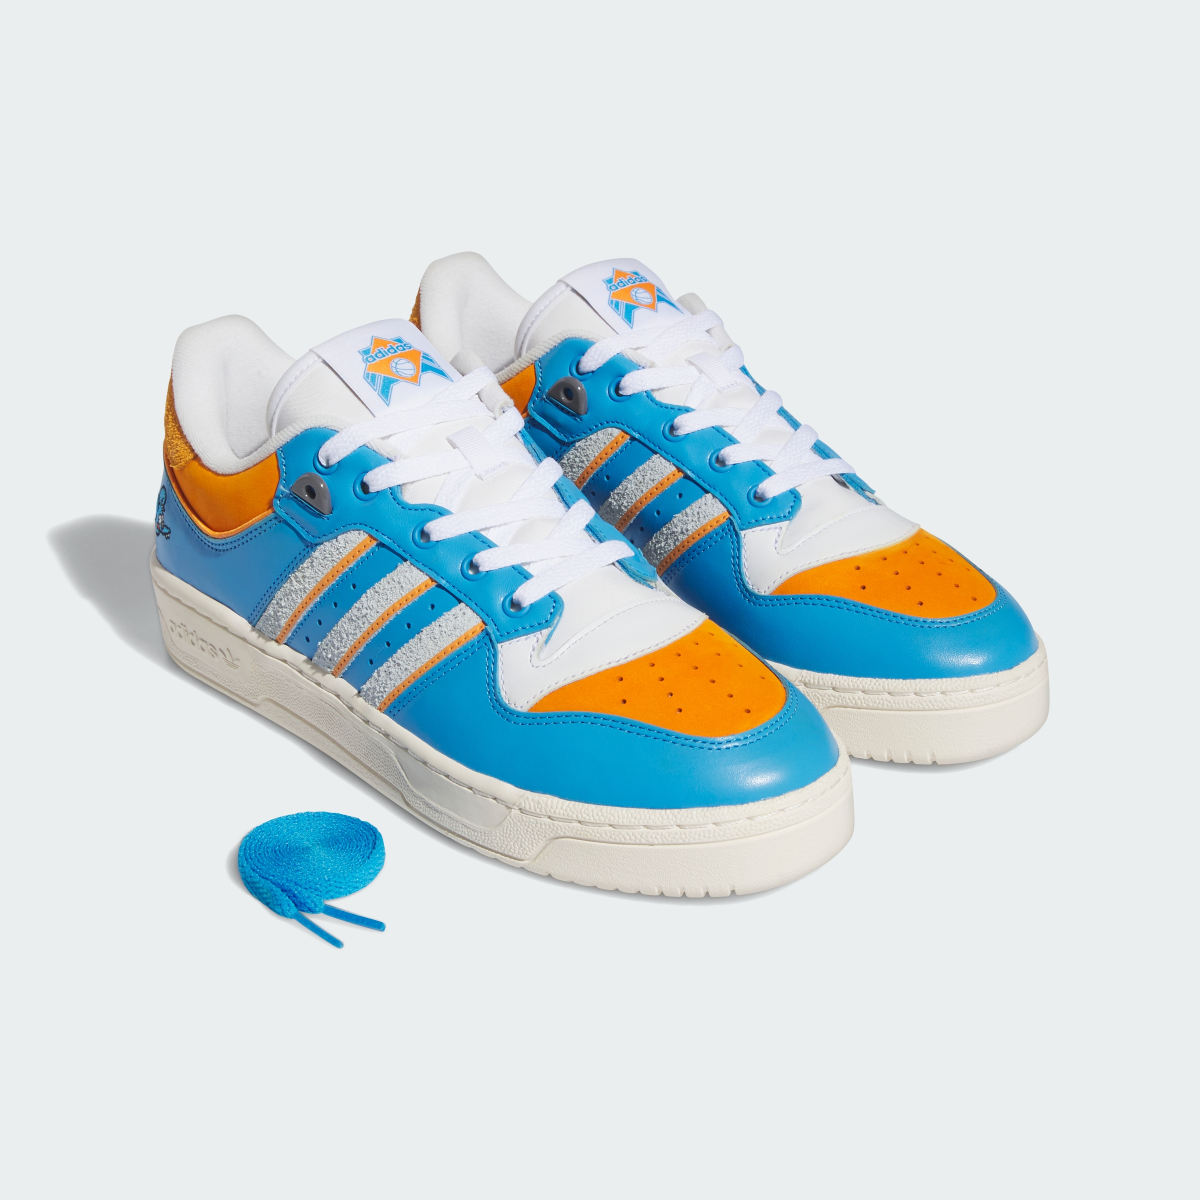 Adidas Rivalry Low Itchy. 12